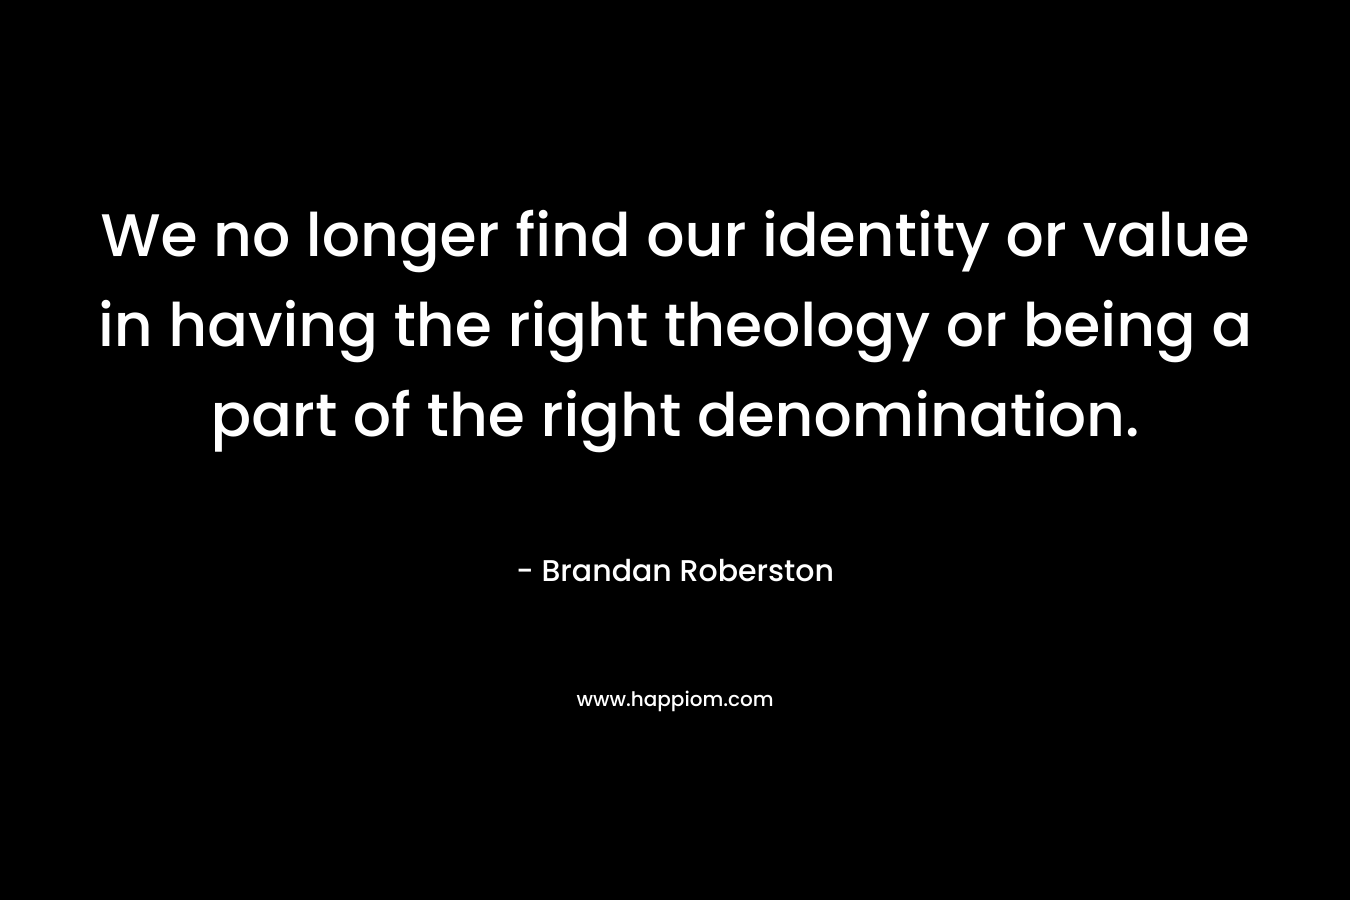 We no longer find our identity or value in having the right theology or being a part of the right denomination. – Brandan Roberston